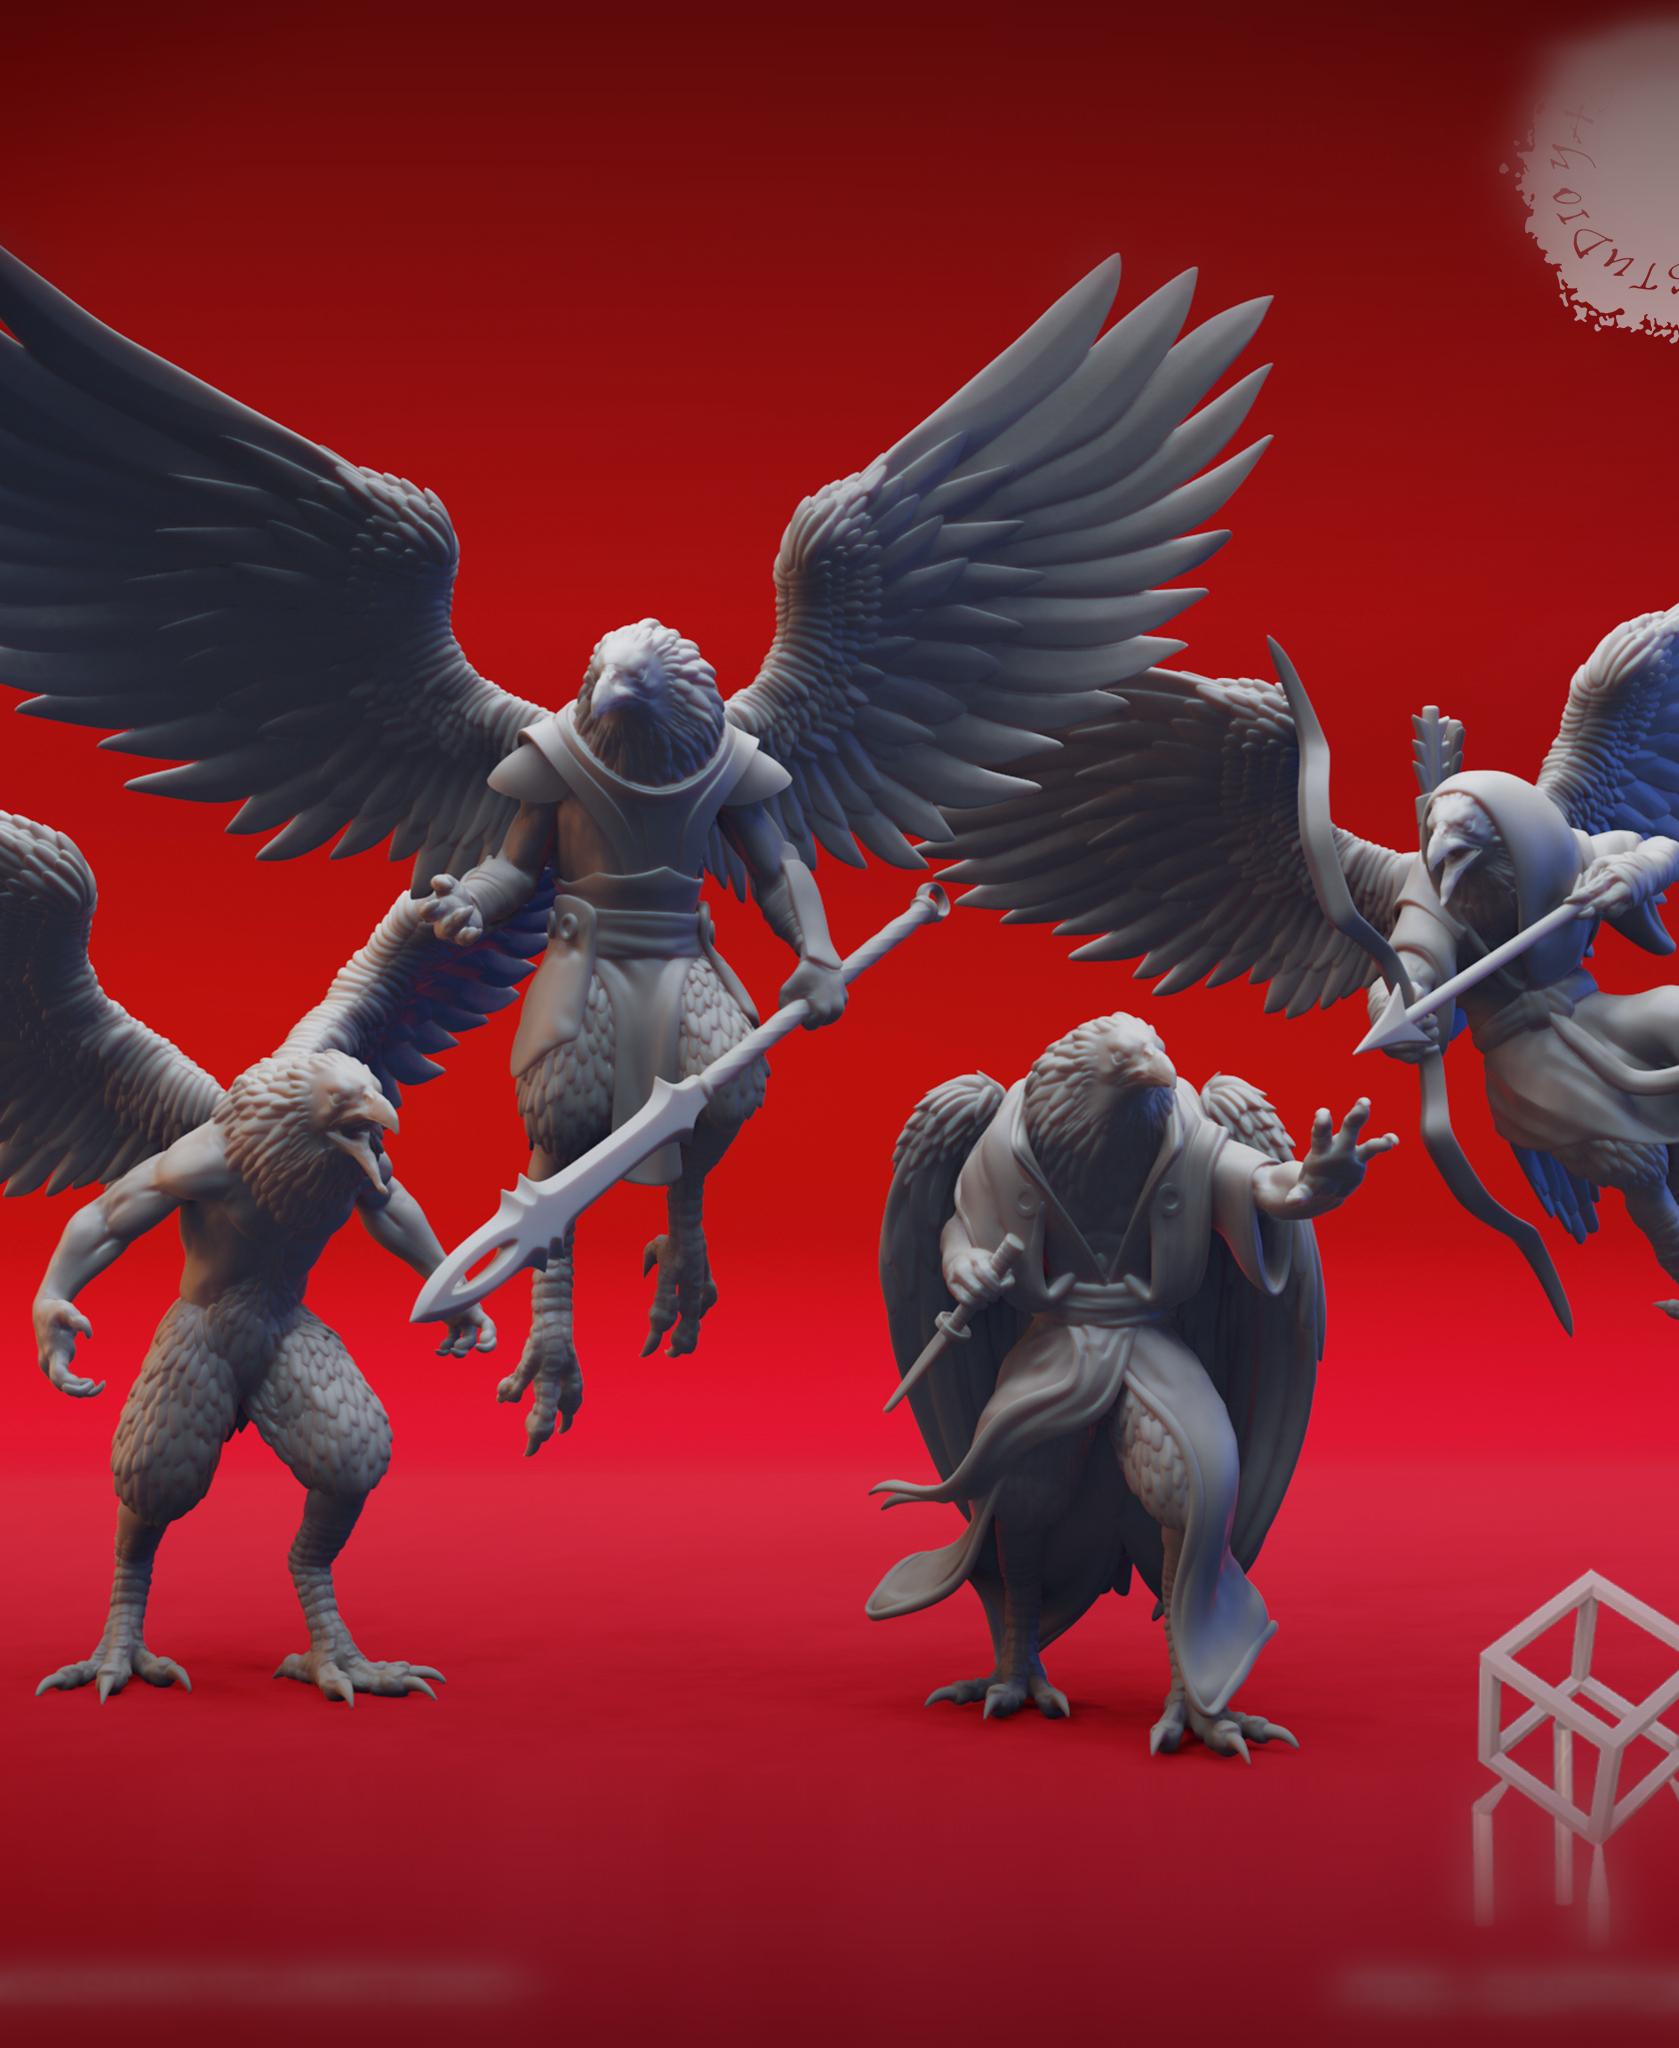 Kindness of Wereravens - Tabletop Miniatures (Pre-Supported) 3d model